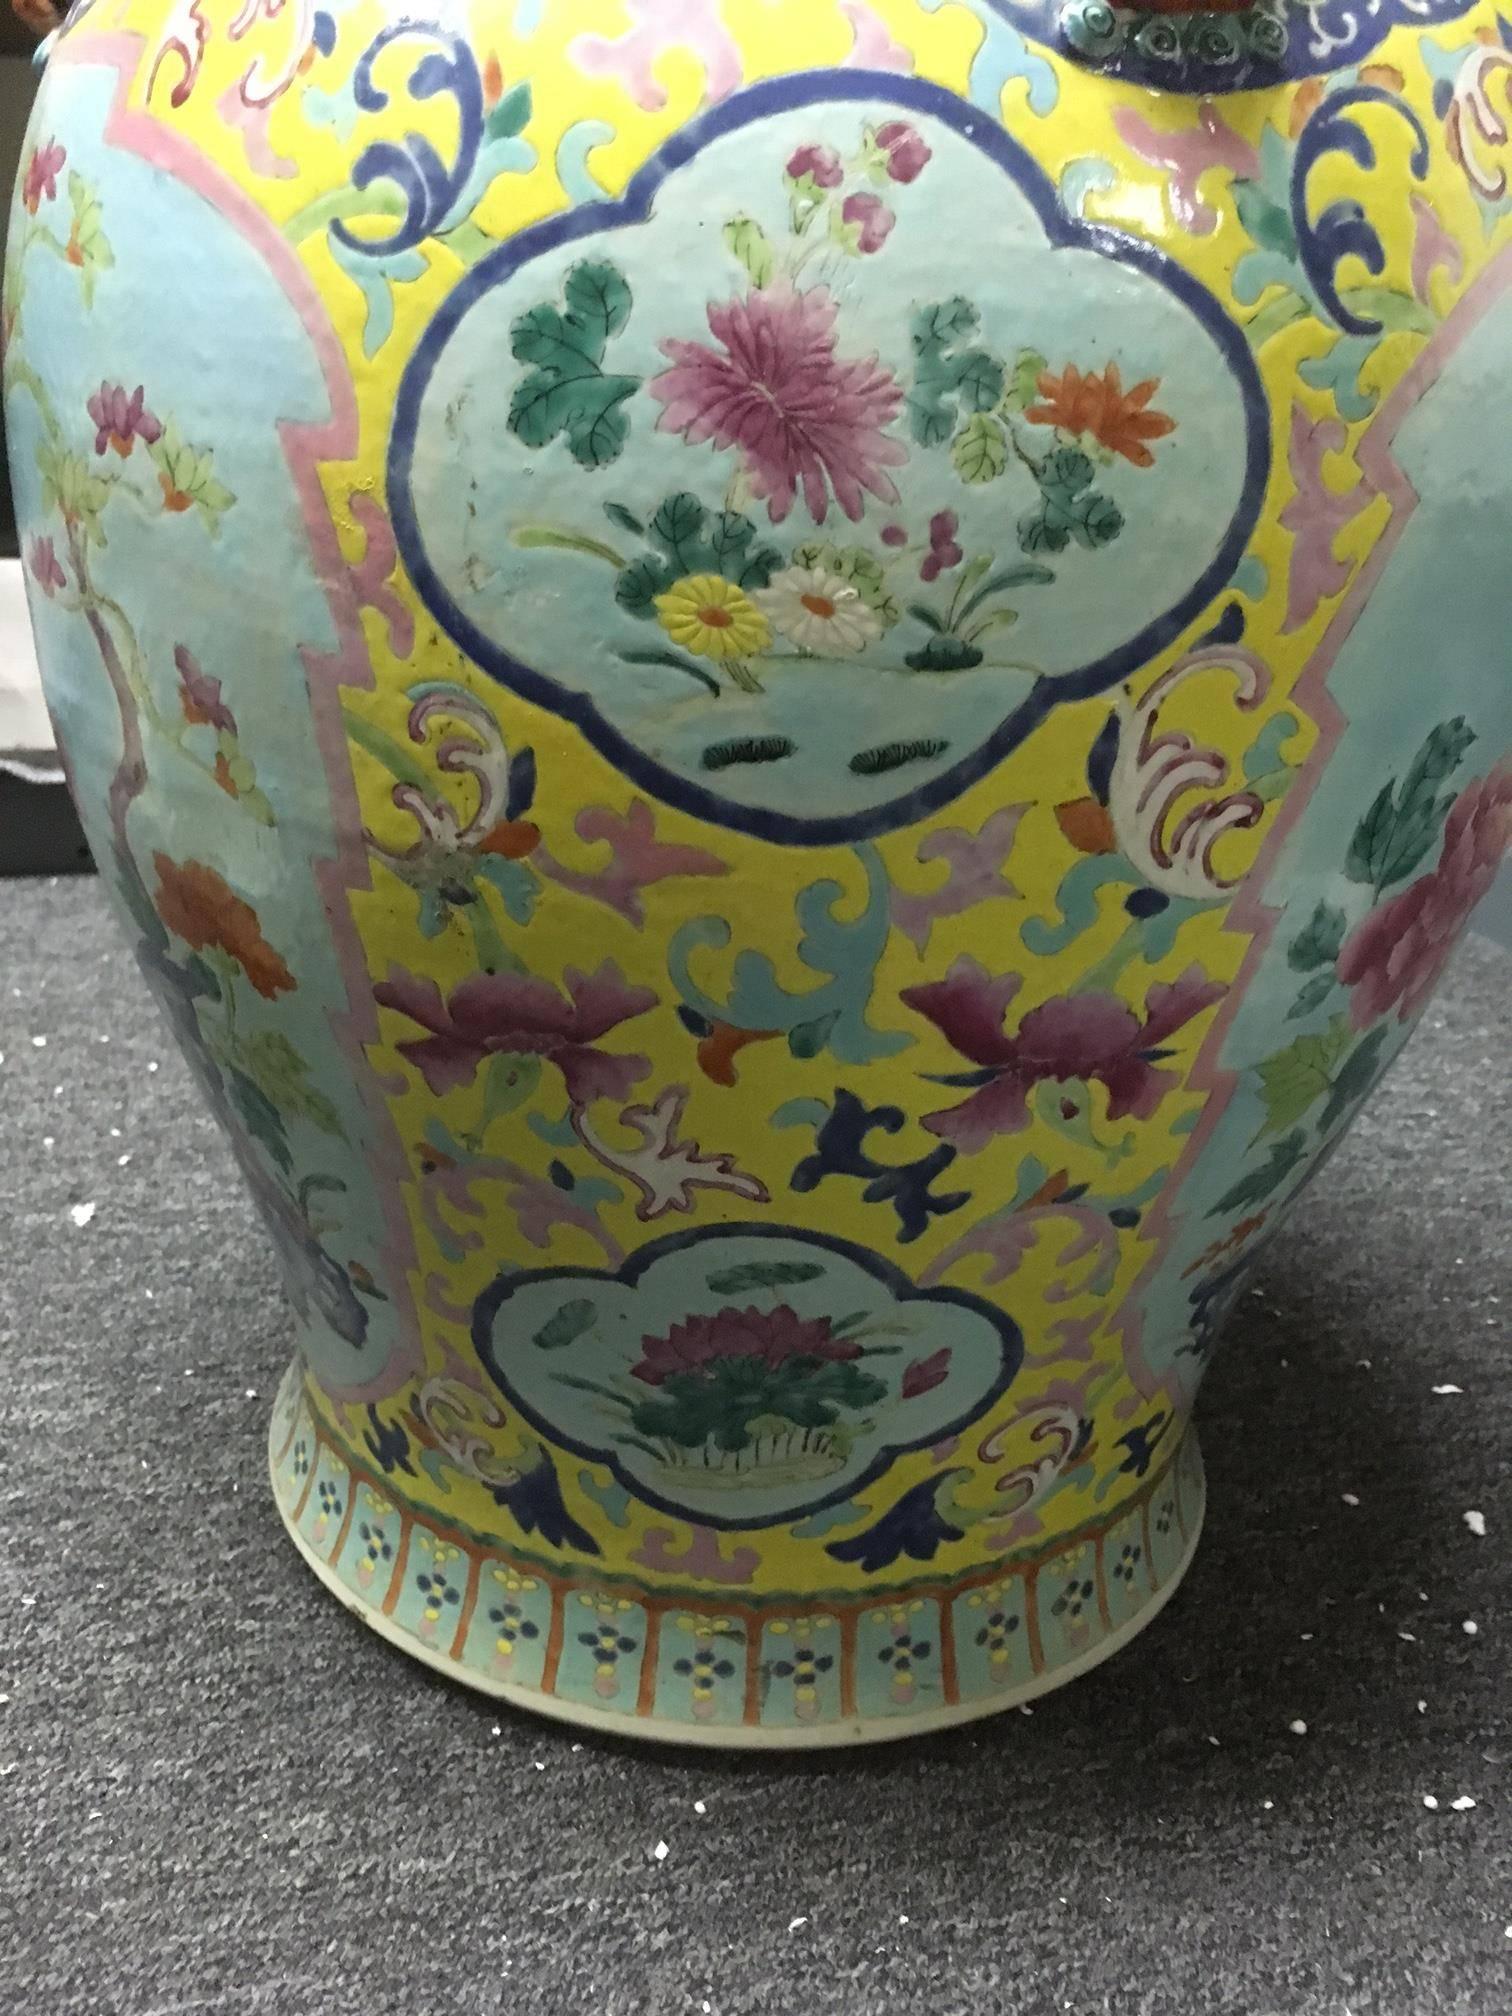 Early 20th Century Chinese Hand-Painted Porcelain Ginger Jar, circa 1900